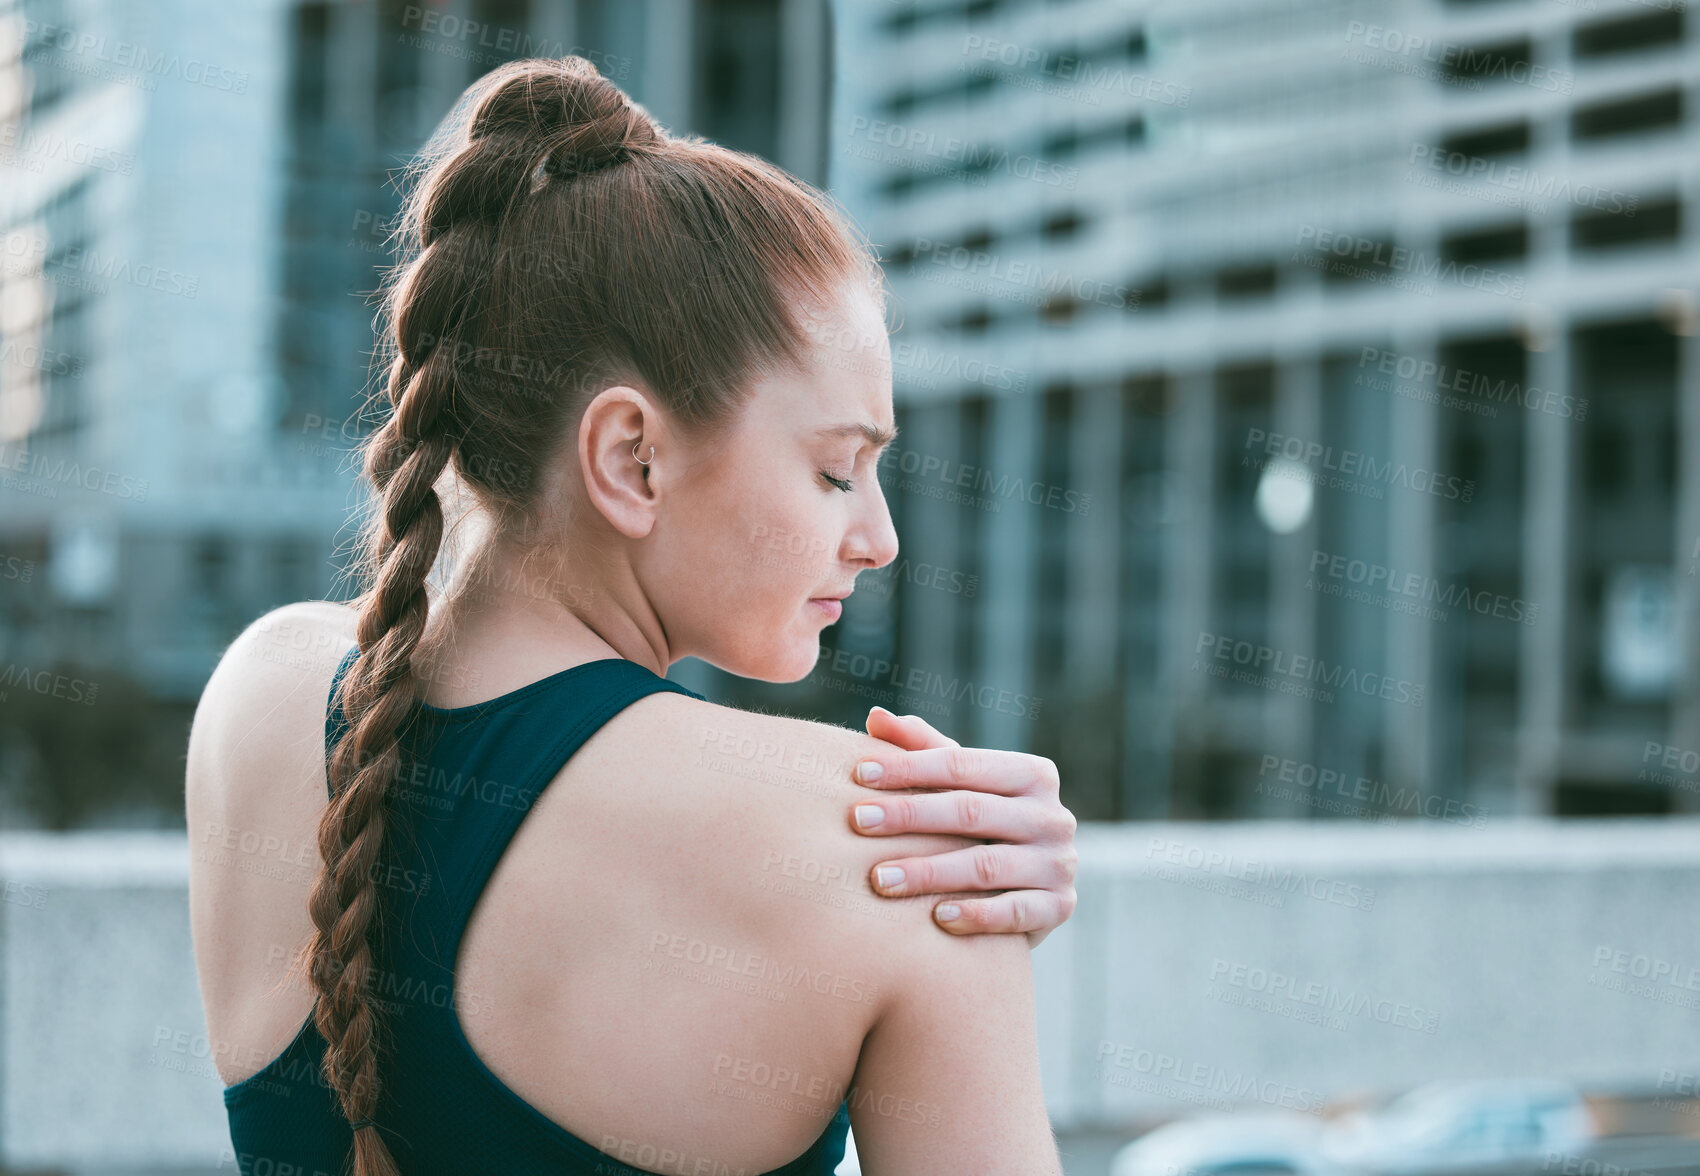 Buy stock photo One young caucasian woman holding her sore shoulder while exercising outdoors. Female athlete suffering with painful arm injury from fractured joint and inflamed muscles during workout. Struggling with stiff body cramps causing discomfort and strain